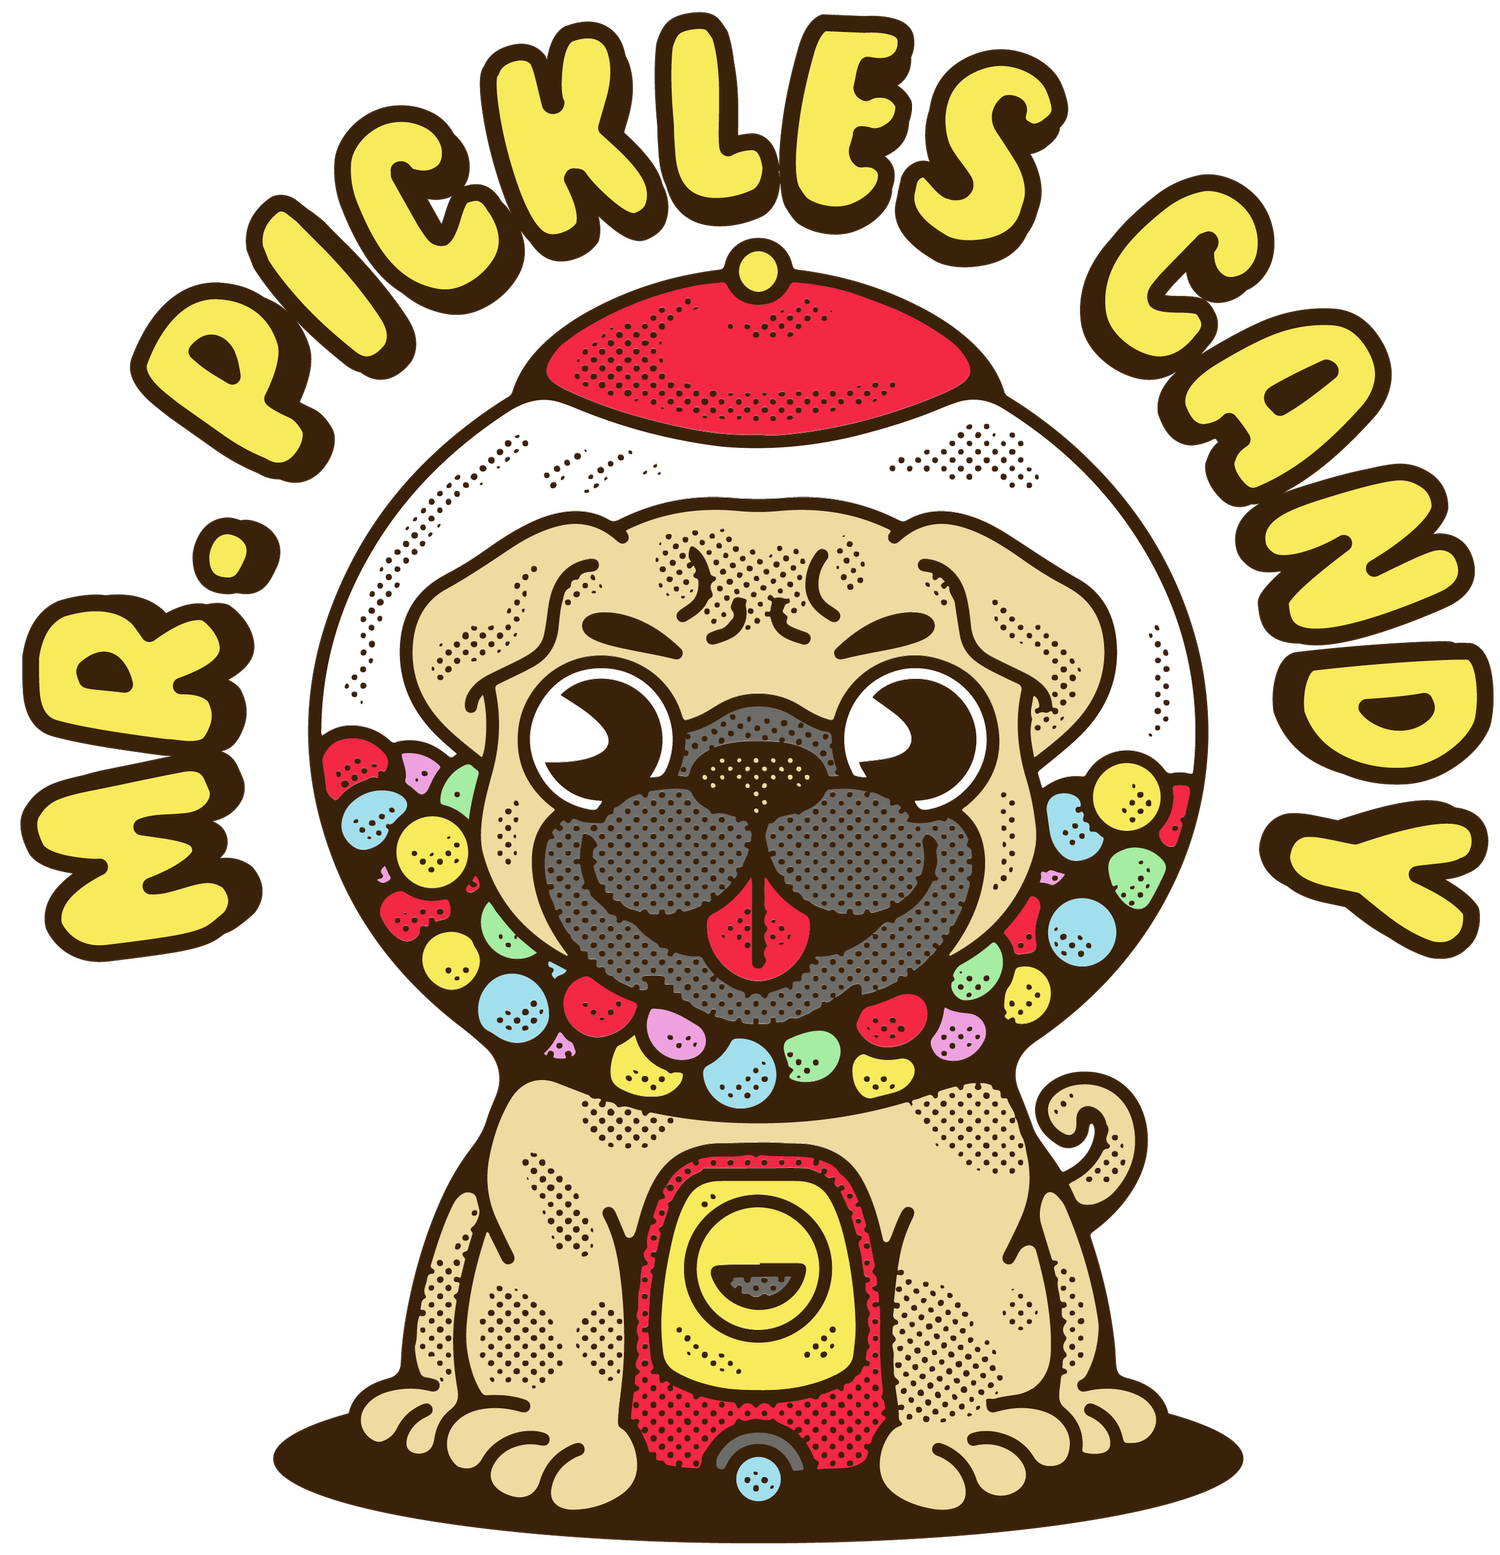 Mr. Pickles Candy